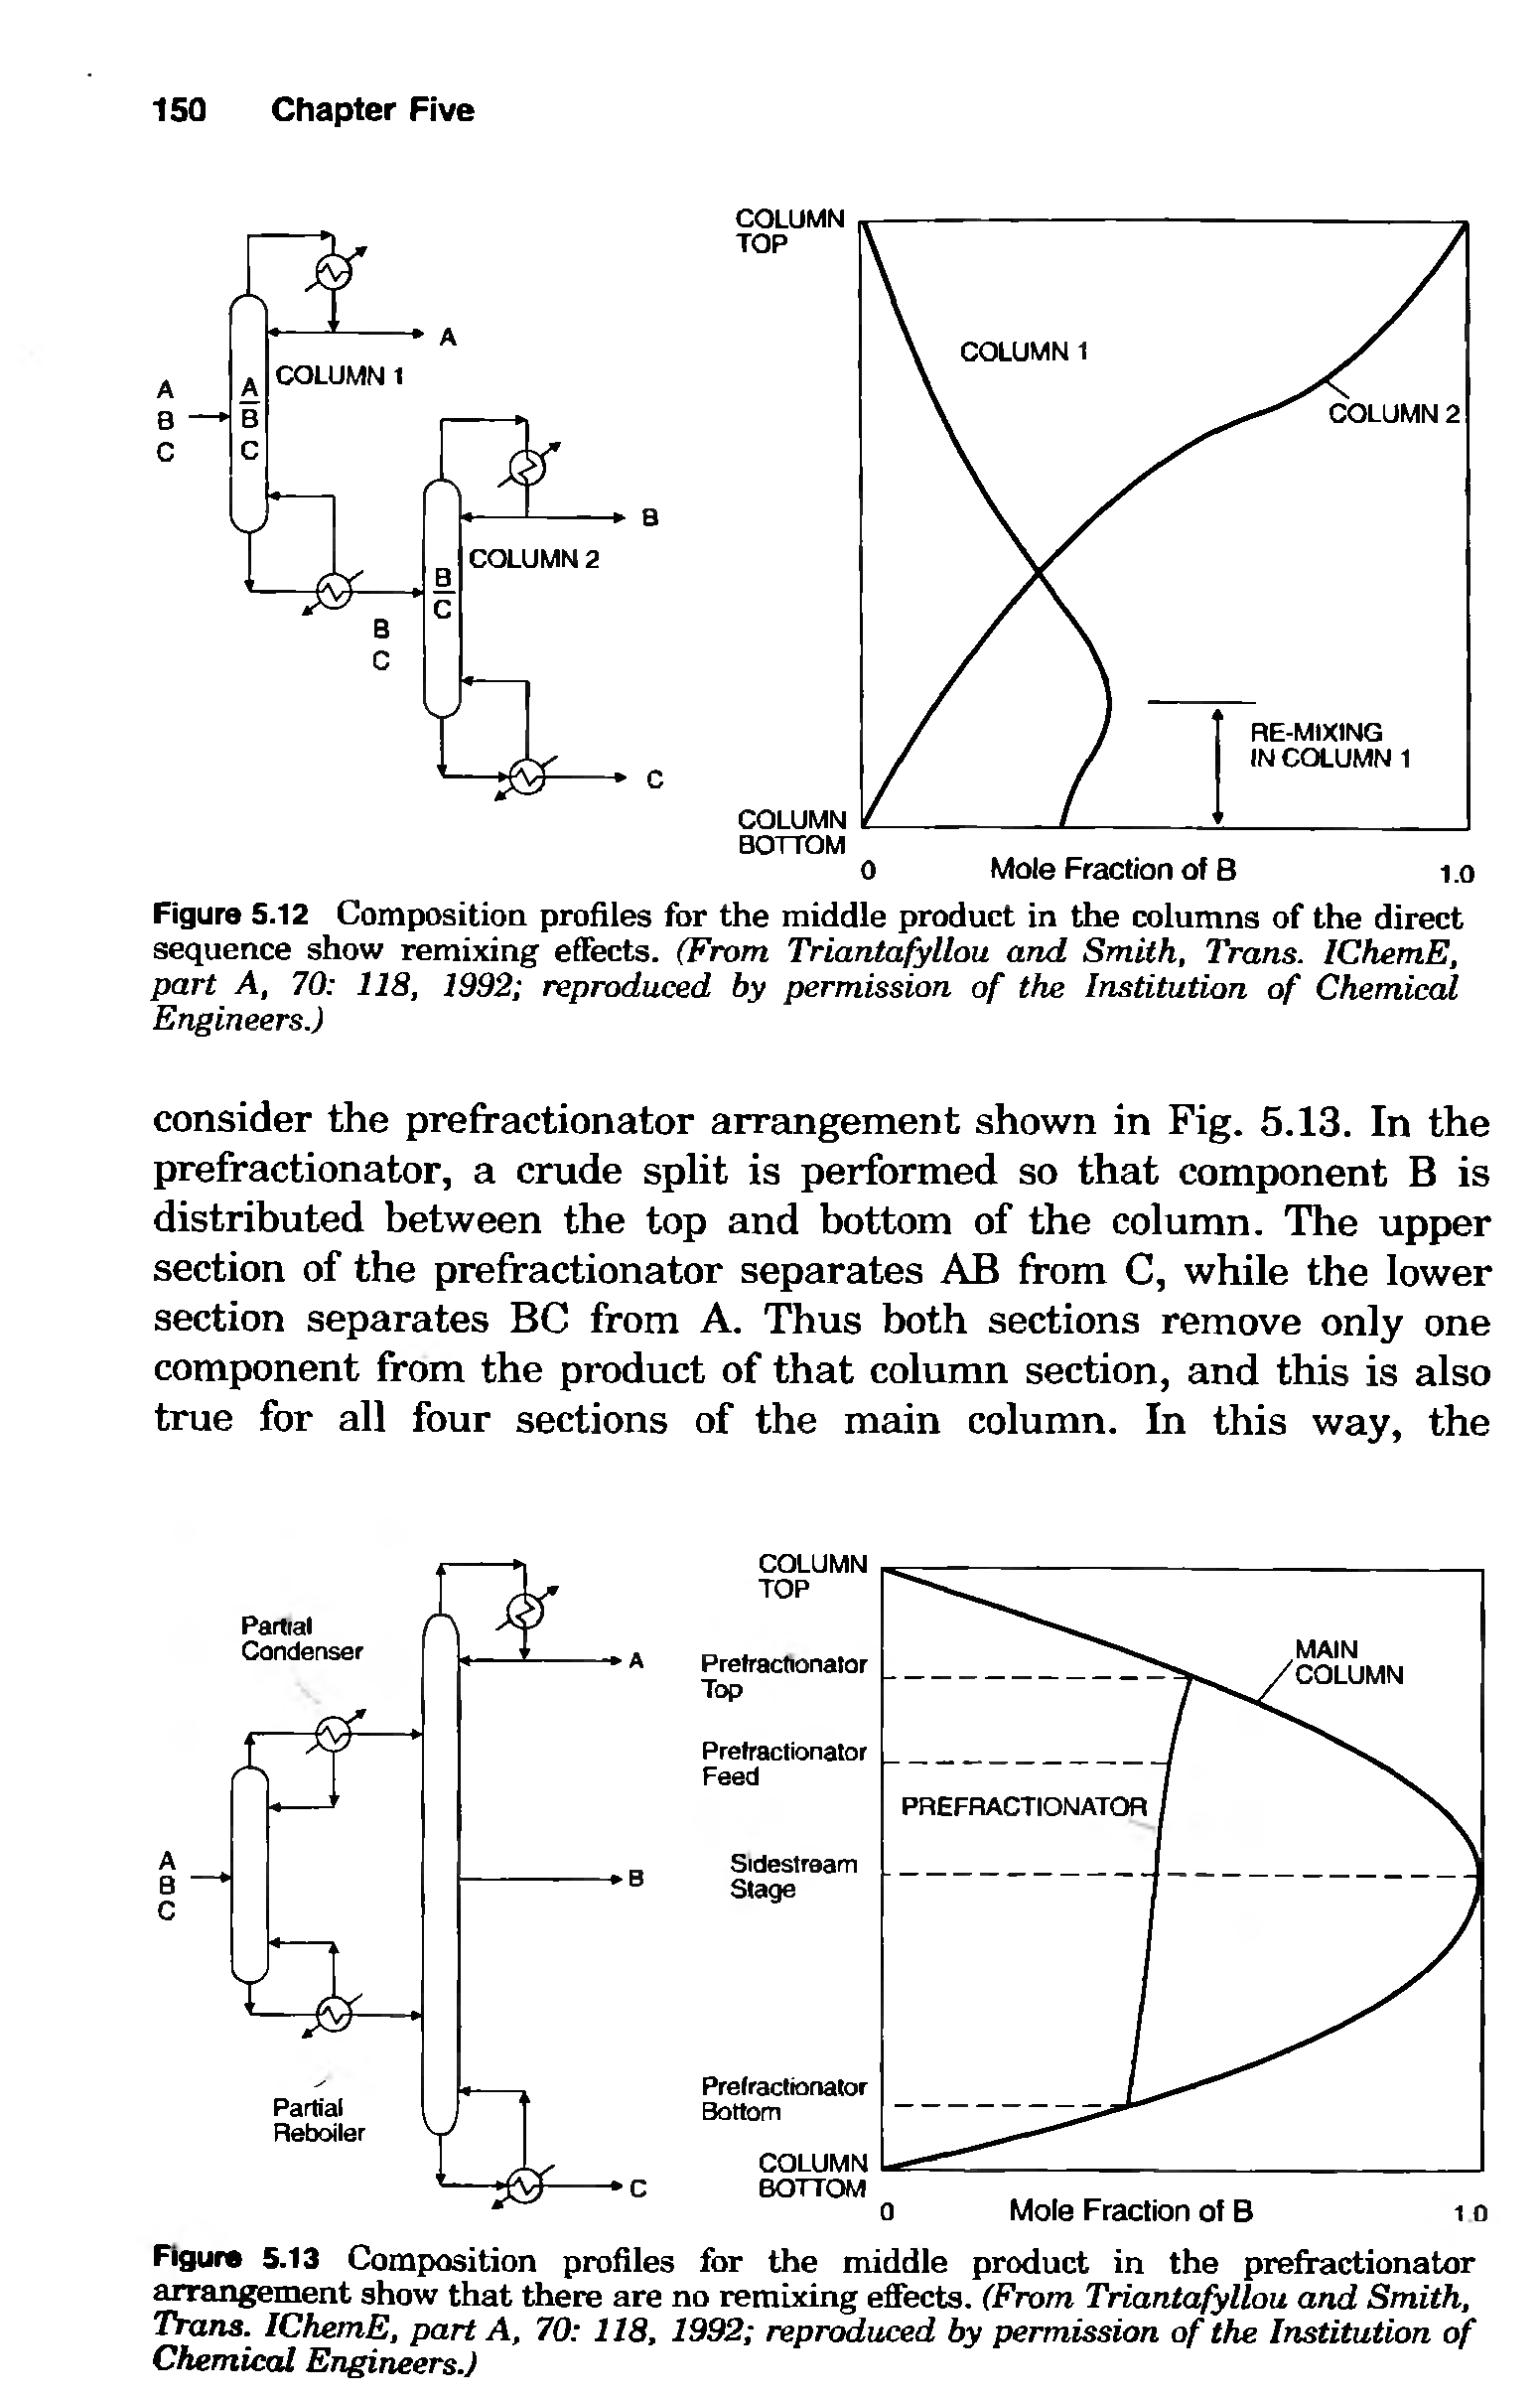 Figure 5.12 Composition profiles for the middle product in the columns of the direct sequence show remixing effects. (From Triantafyllou and Smith, Trans. IChemE, part A, 70 118, 1992 reproduced by permission of the Institution of Chemical Engineers.)...